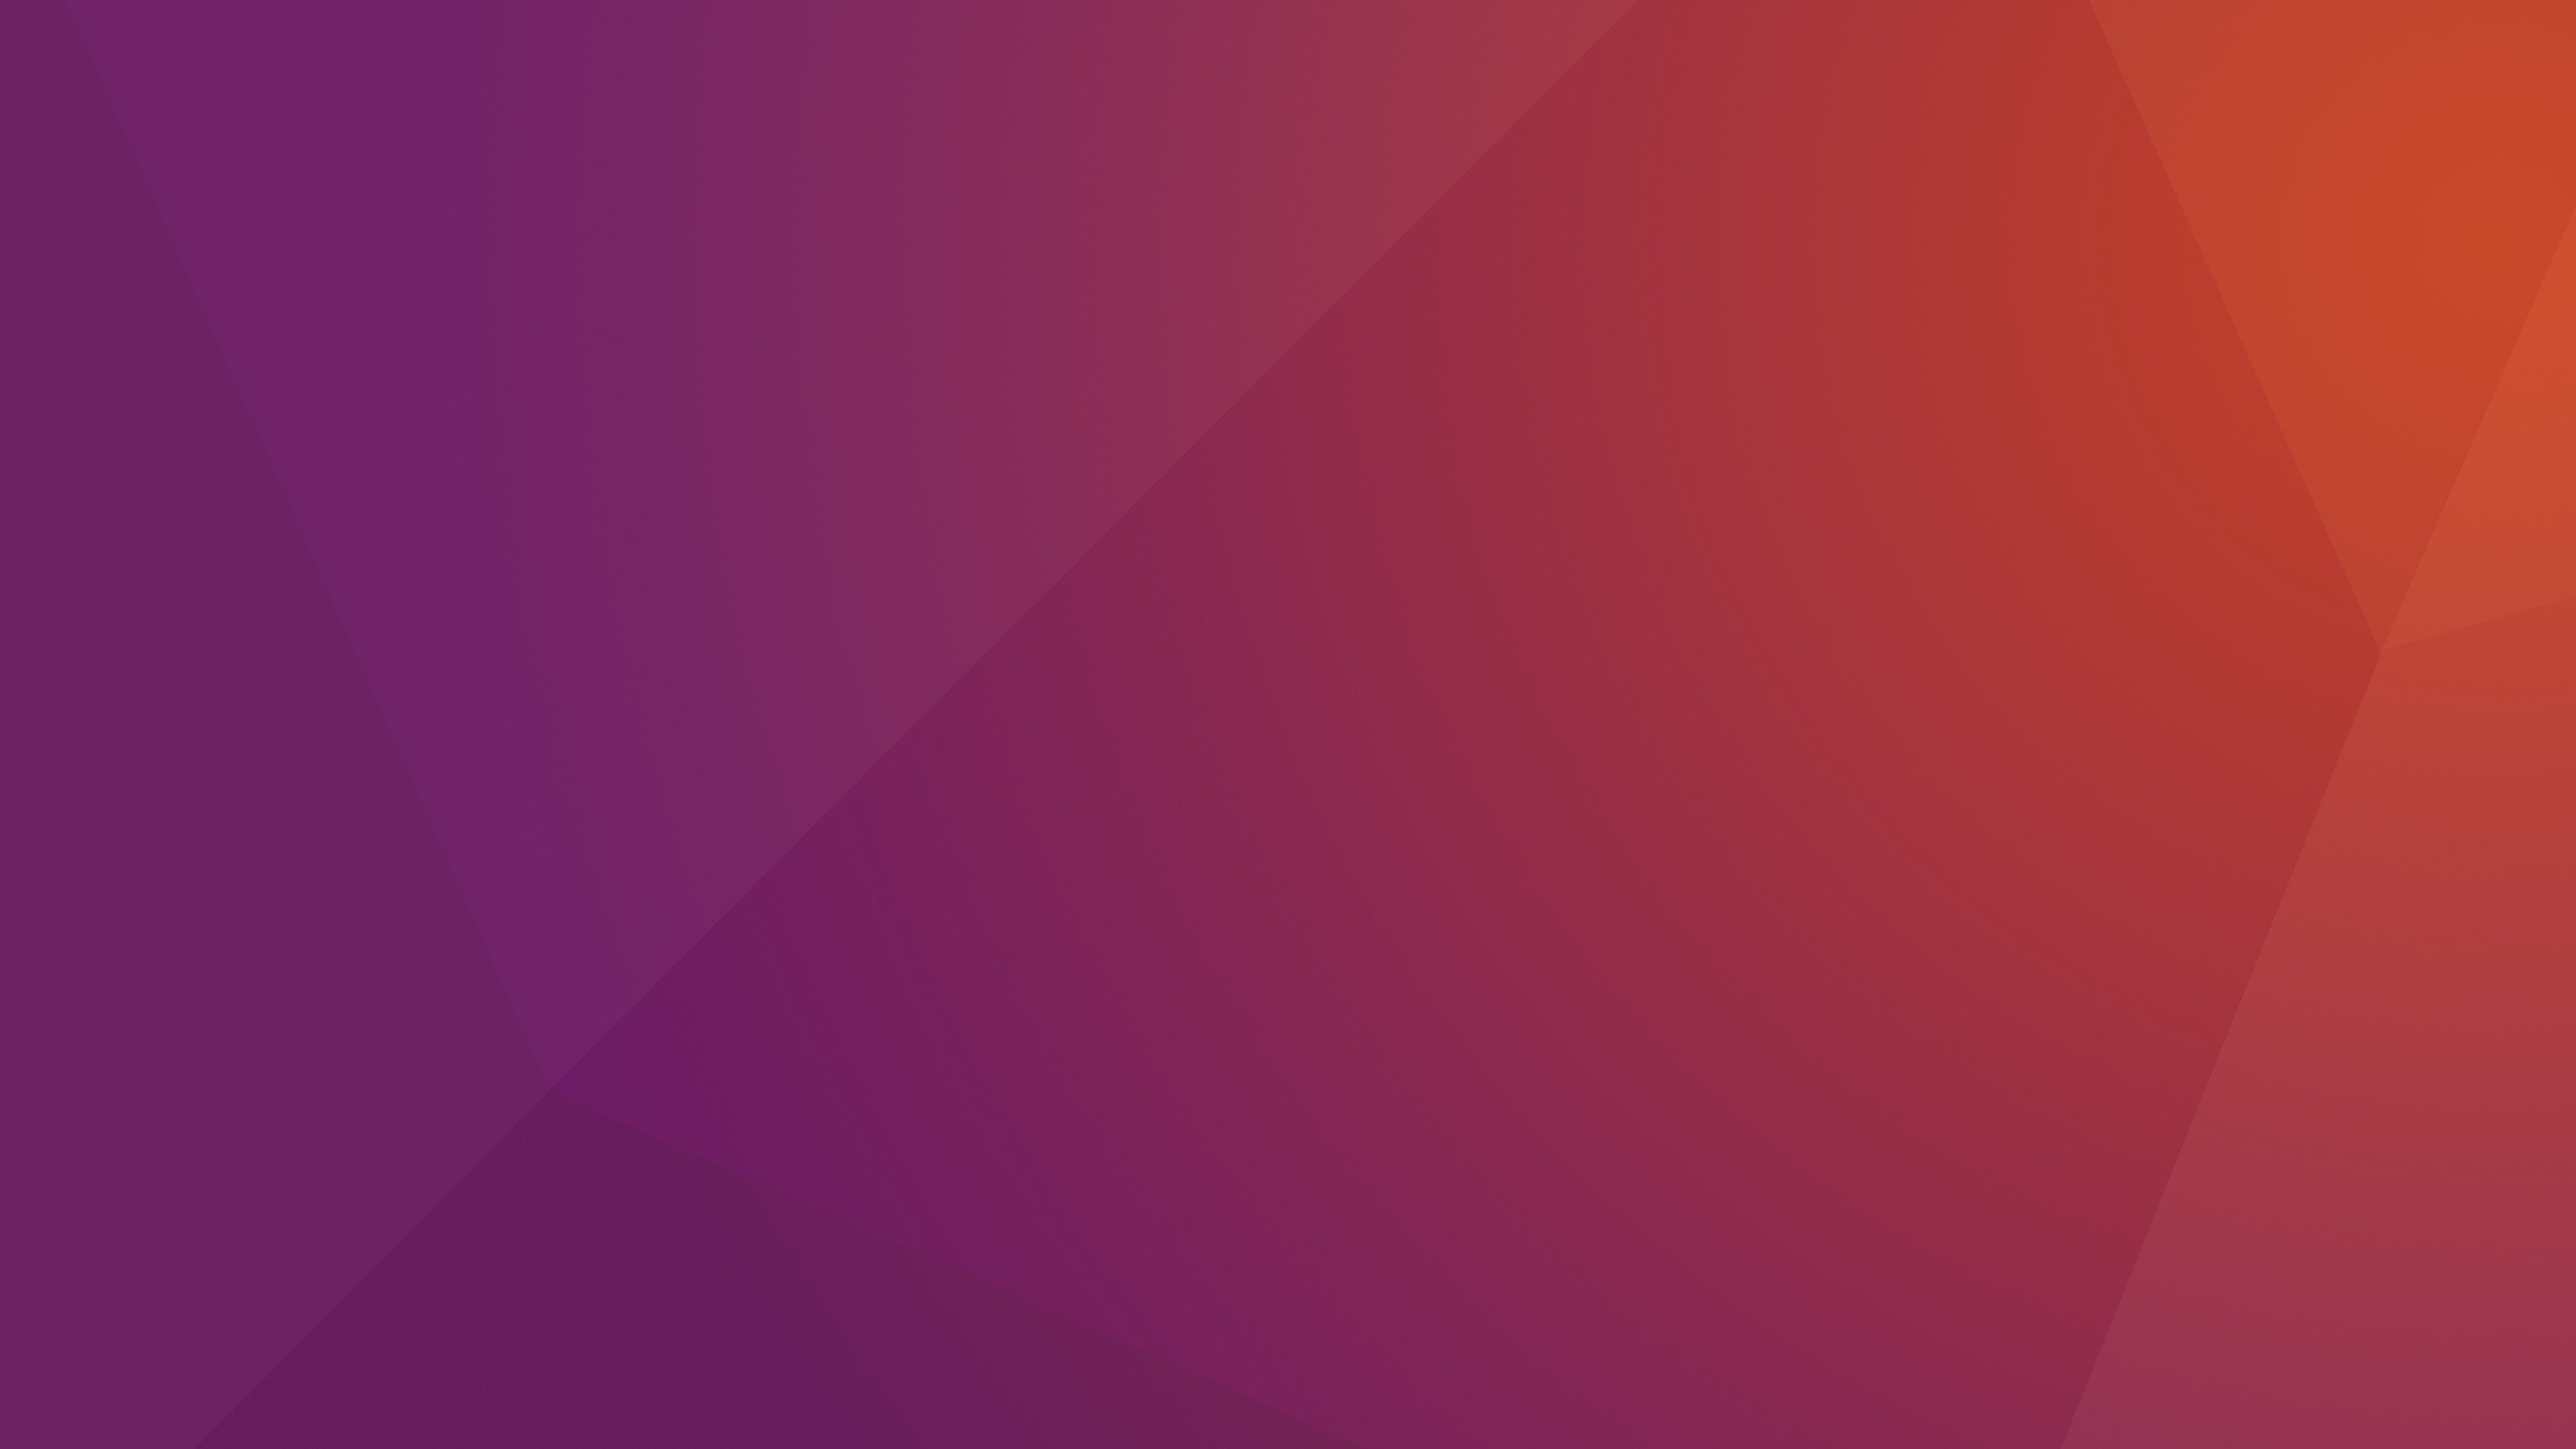 Ubuntu 16.04 LTS Wallpapers Revealed for Desktop and Phone